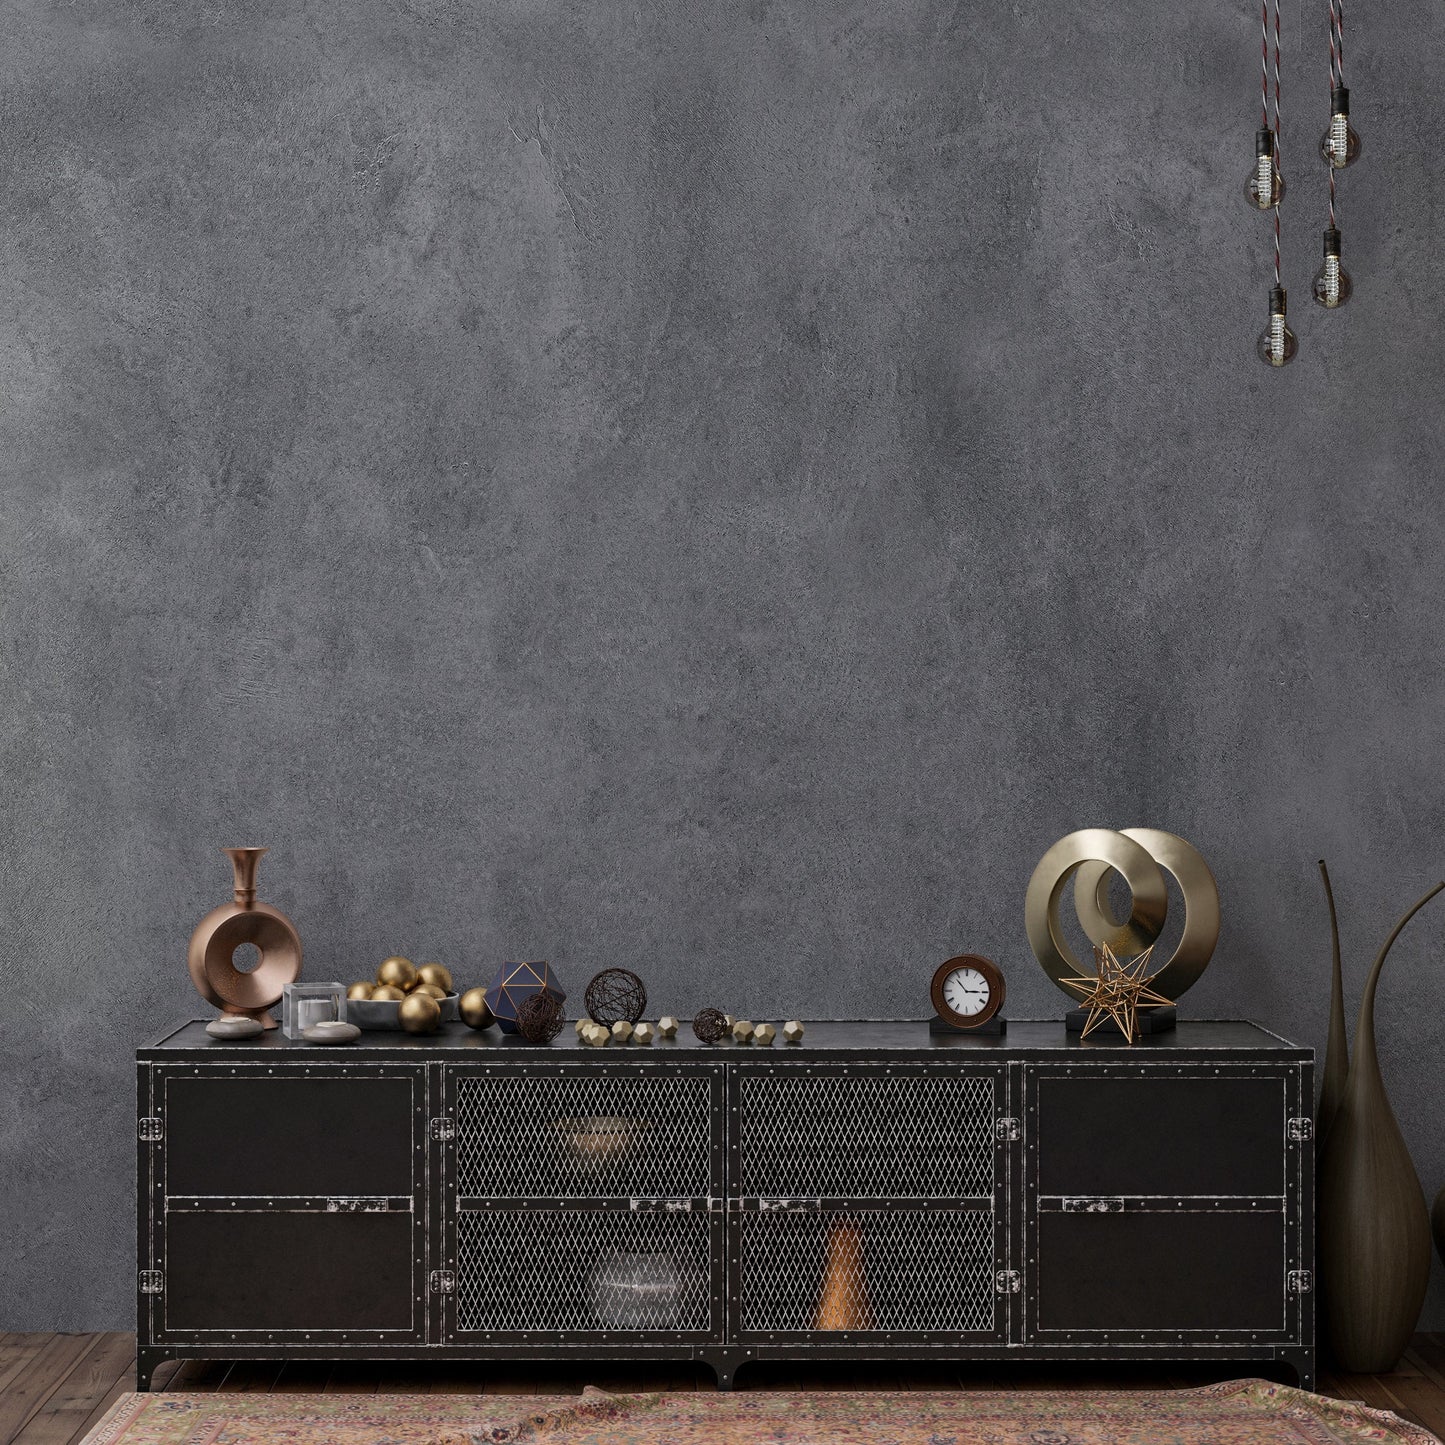 Melli Mello Be Concrete photowall living room style interior inspiration industrial feel cabinet